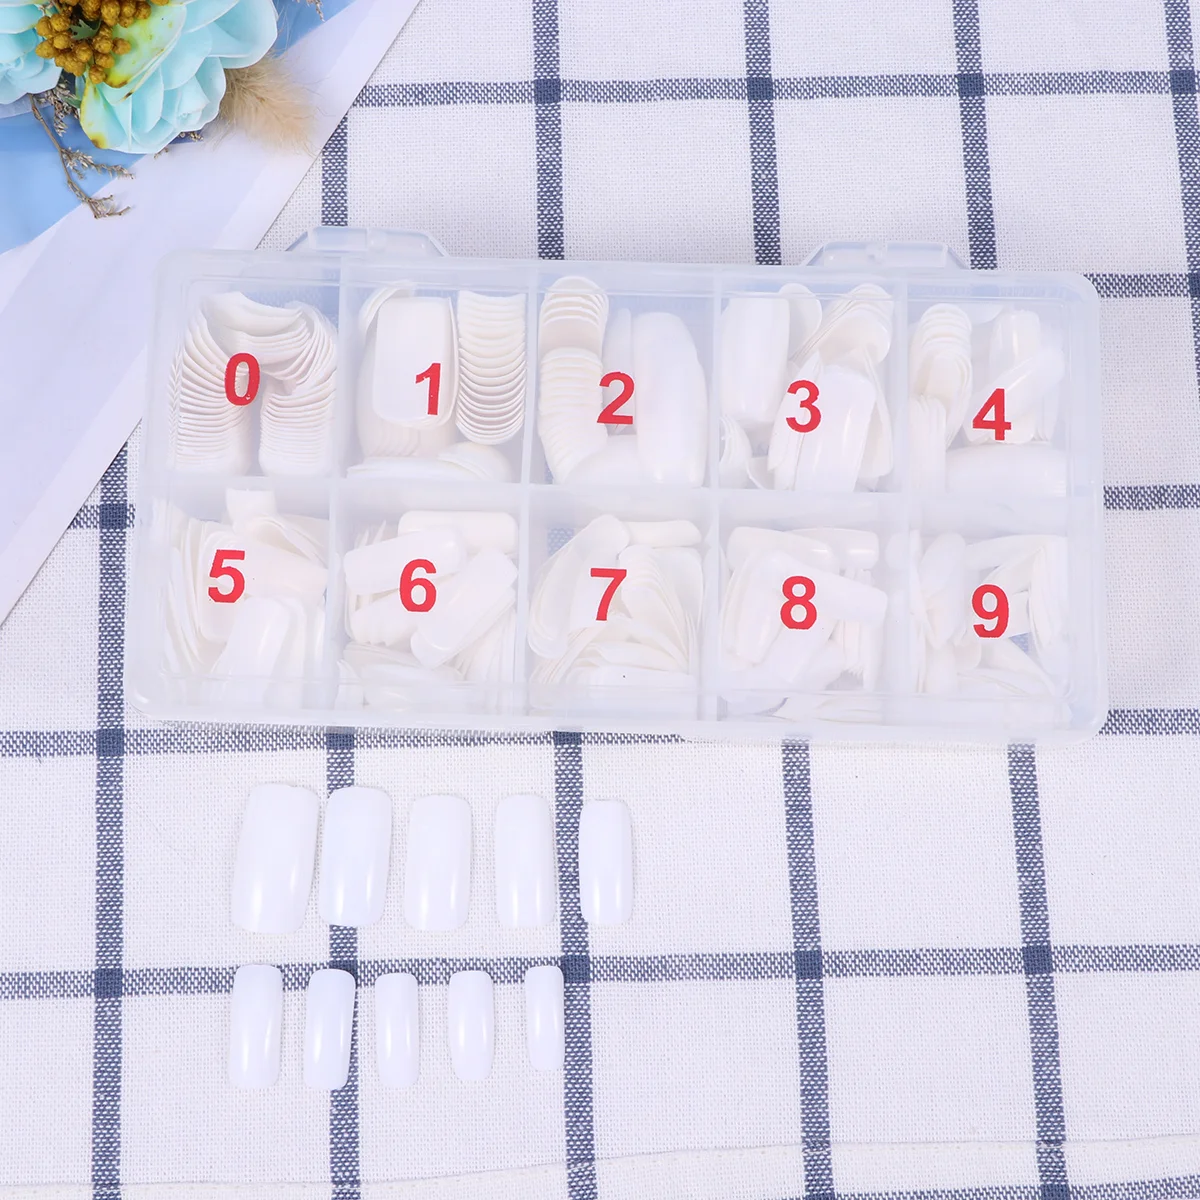 

500pcs Artificial French Nail Tips Full Cover False Nails Artificial Tips with Box for Salons Home DIY Manicure(White) Tool